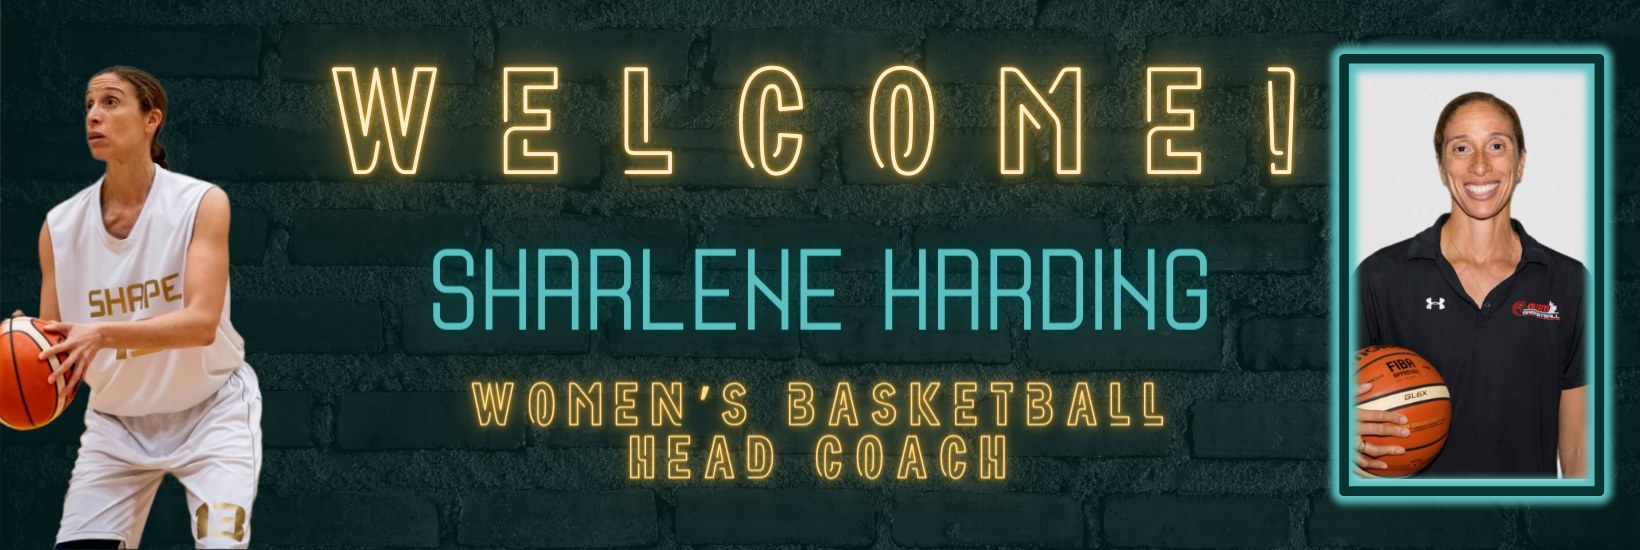 Women's Basketball Ready to Hit the Hardcourt with New Coach Harding